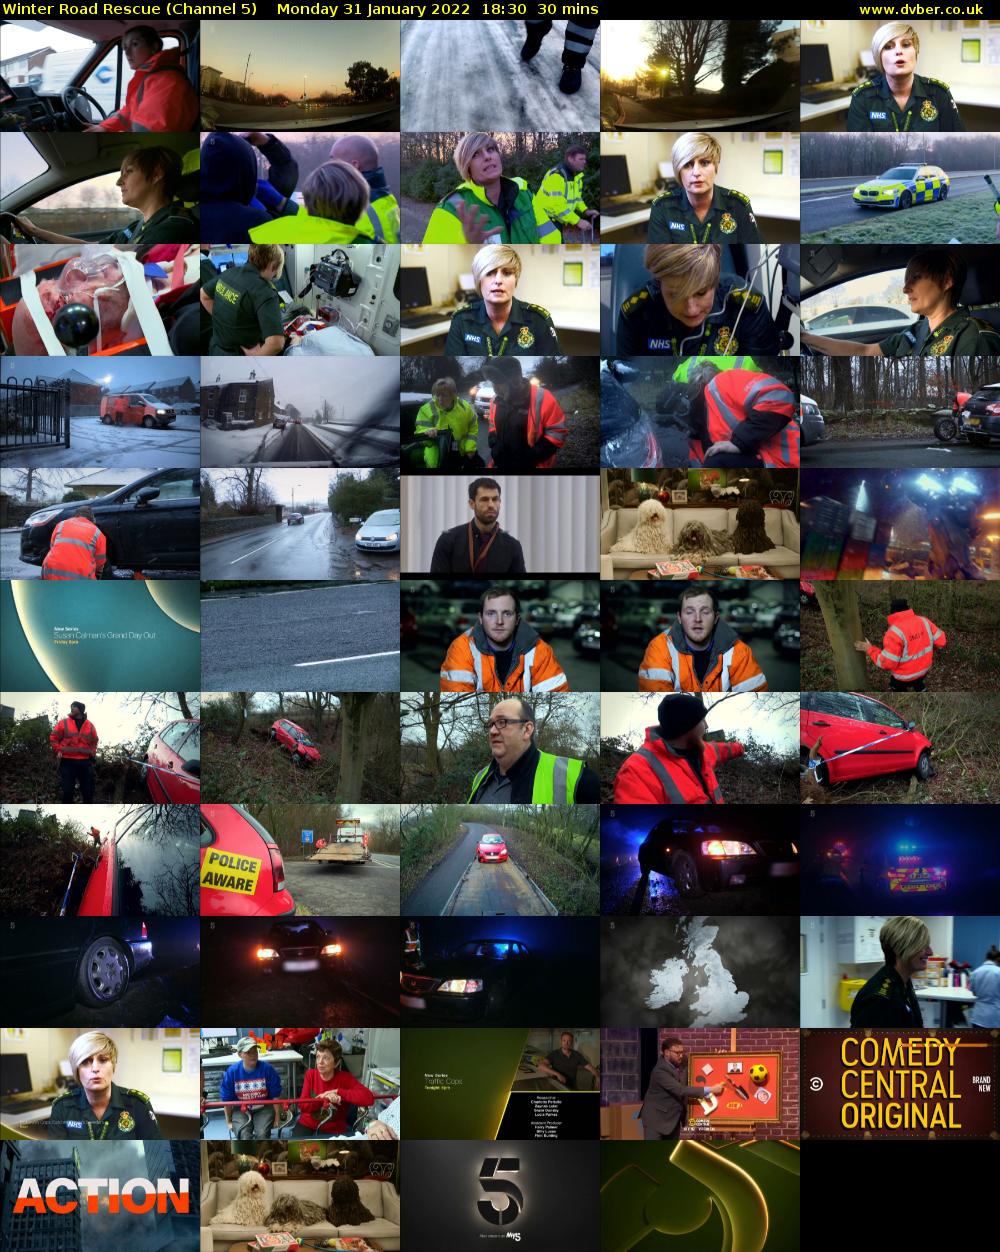 Winter Road Rescue (Channel 5) Monday 31 January 2022 18:30 - 19:00